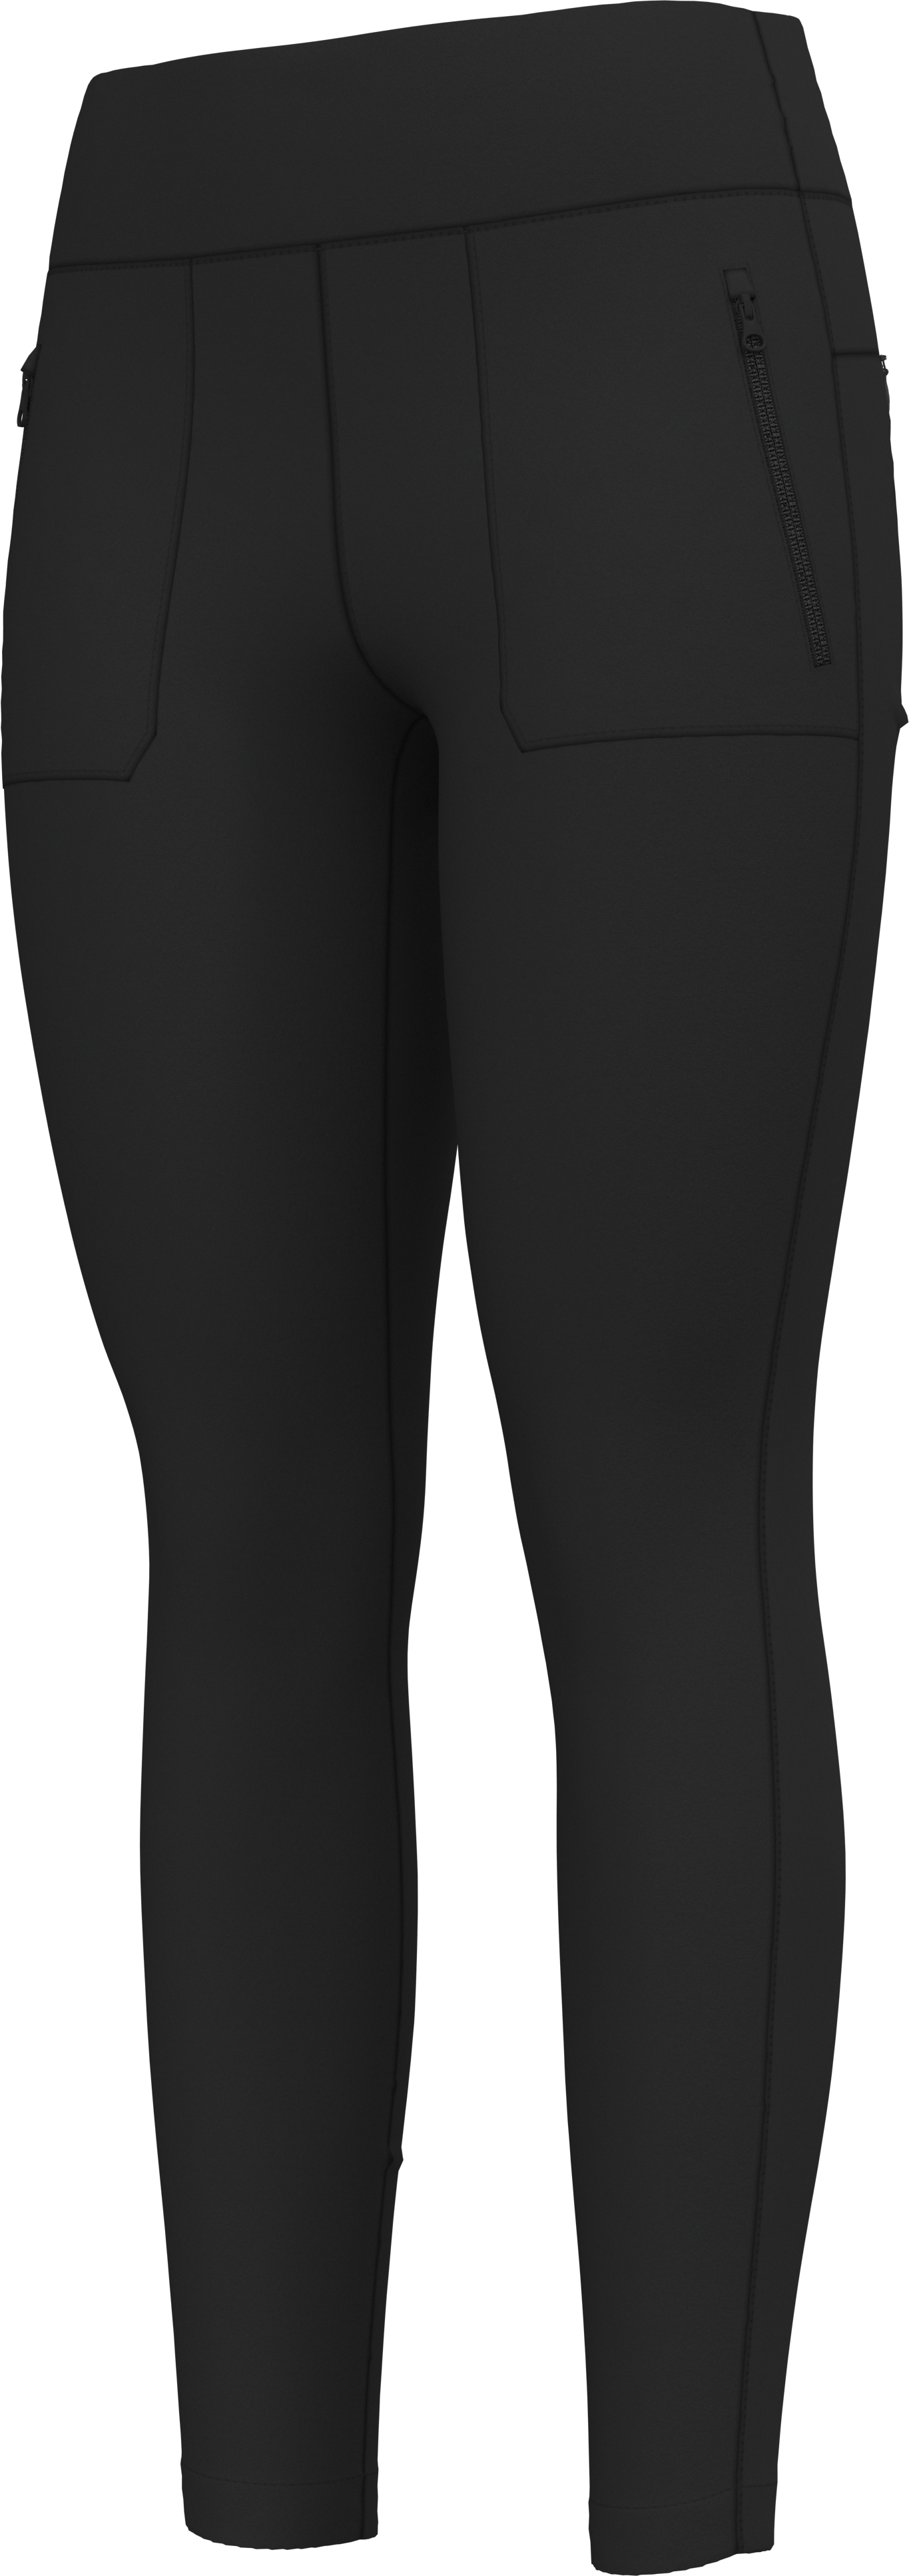 Women's The North Face Paramount Hybrid Hi-Rise Tight